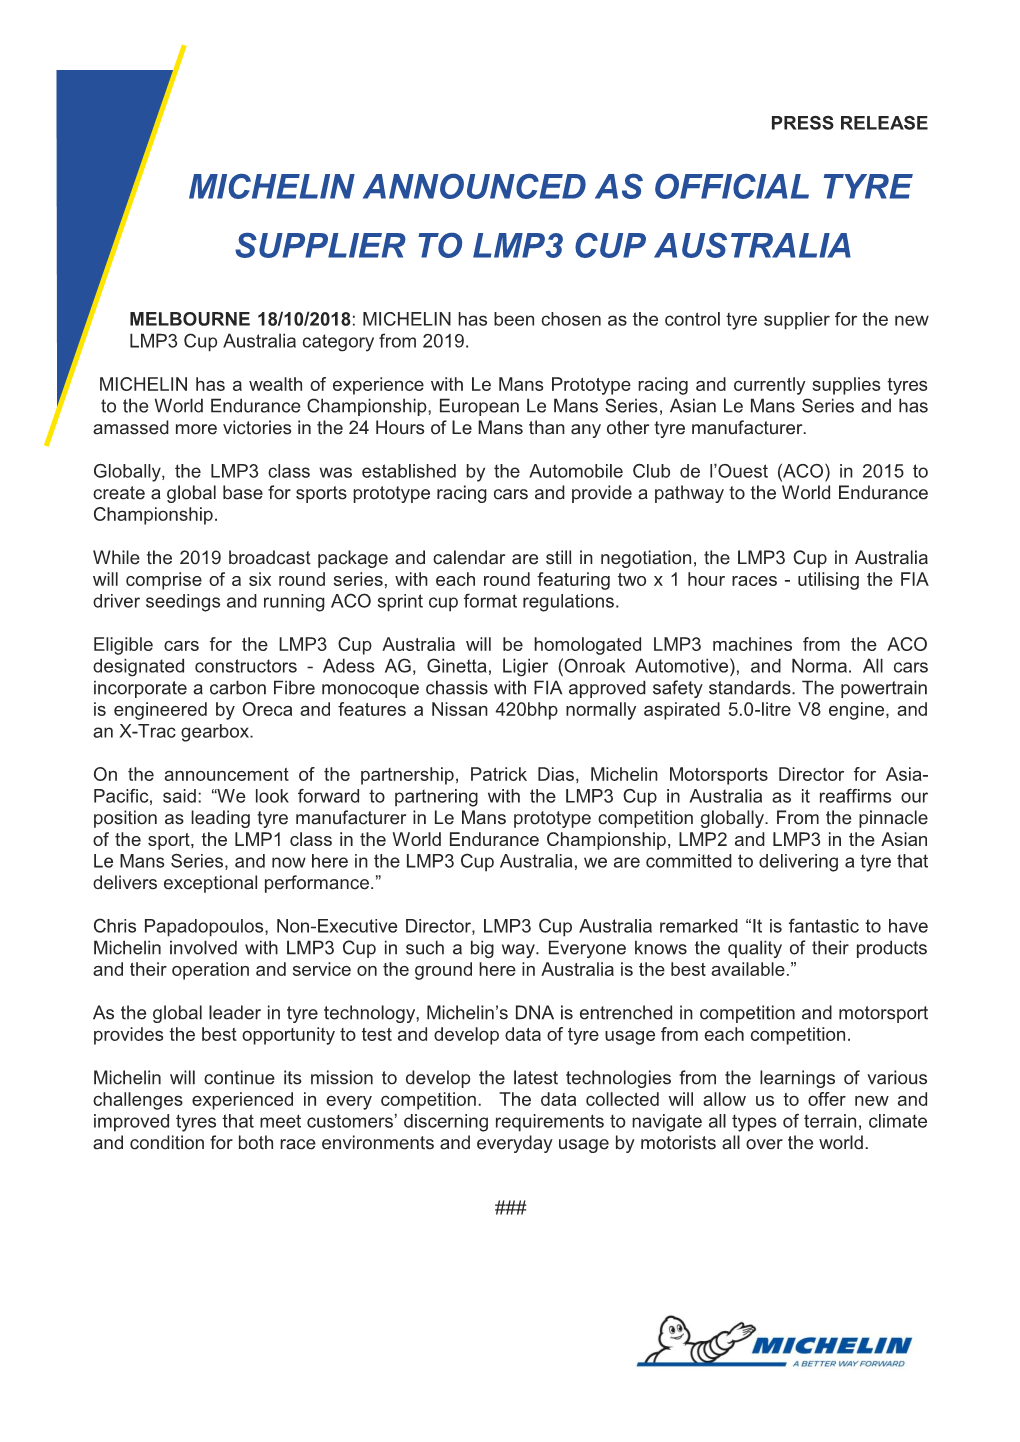 Michelin Announced As Official Tyre Supplier to Lmp3 Cup Australia